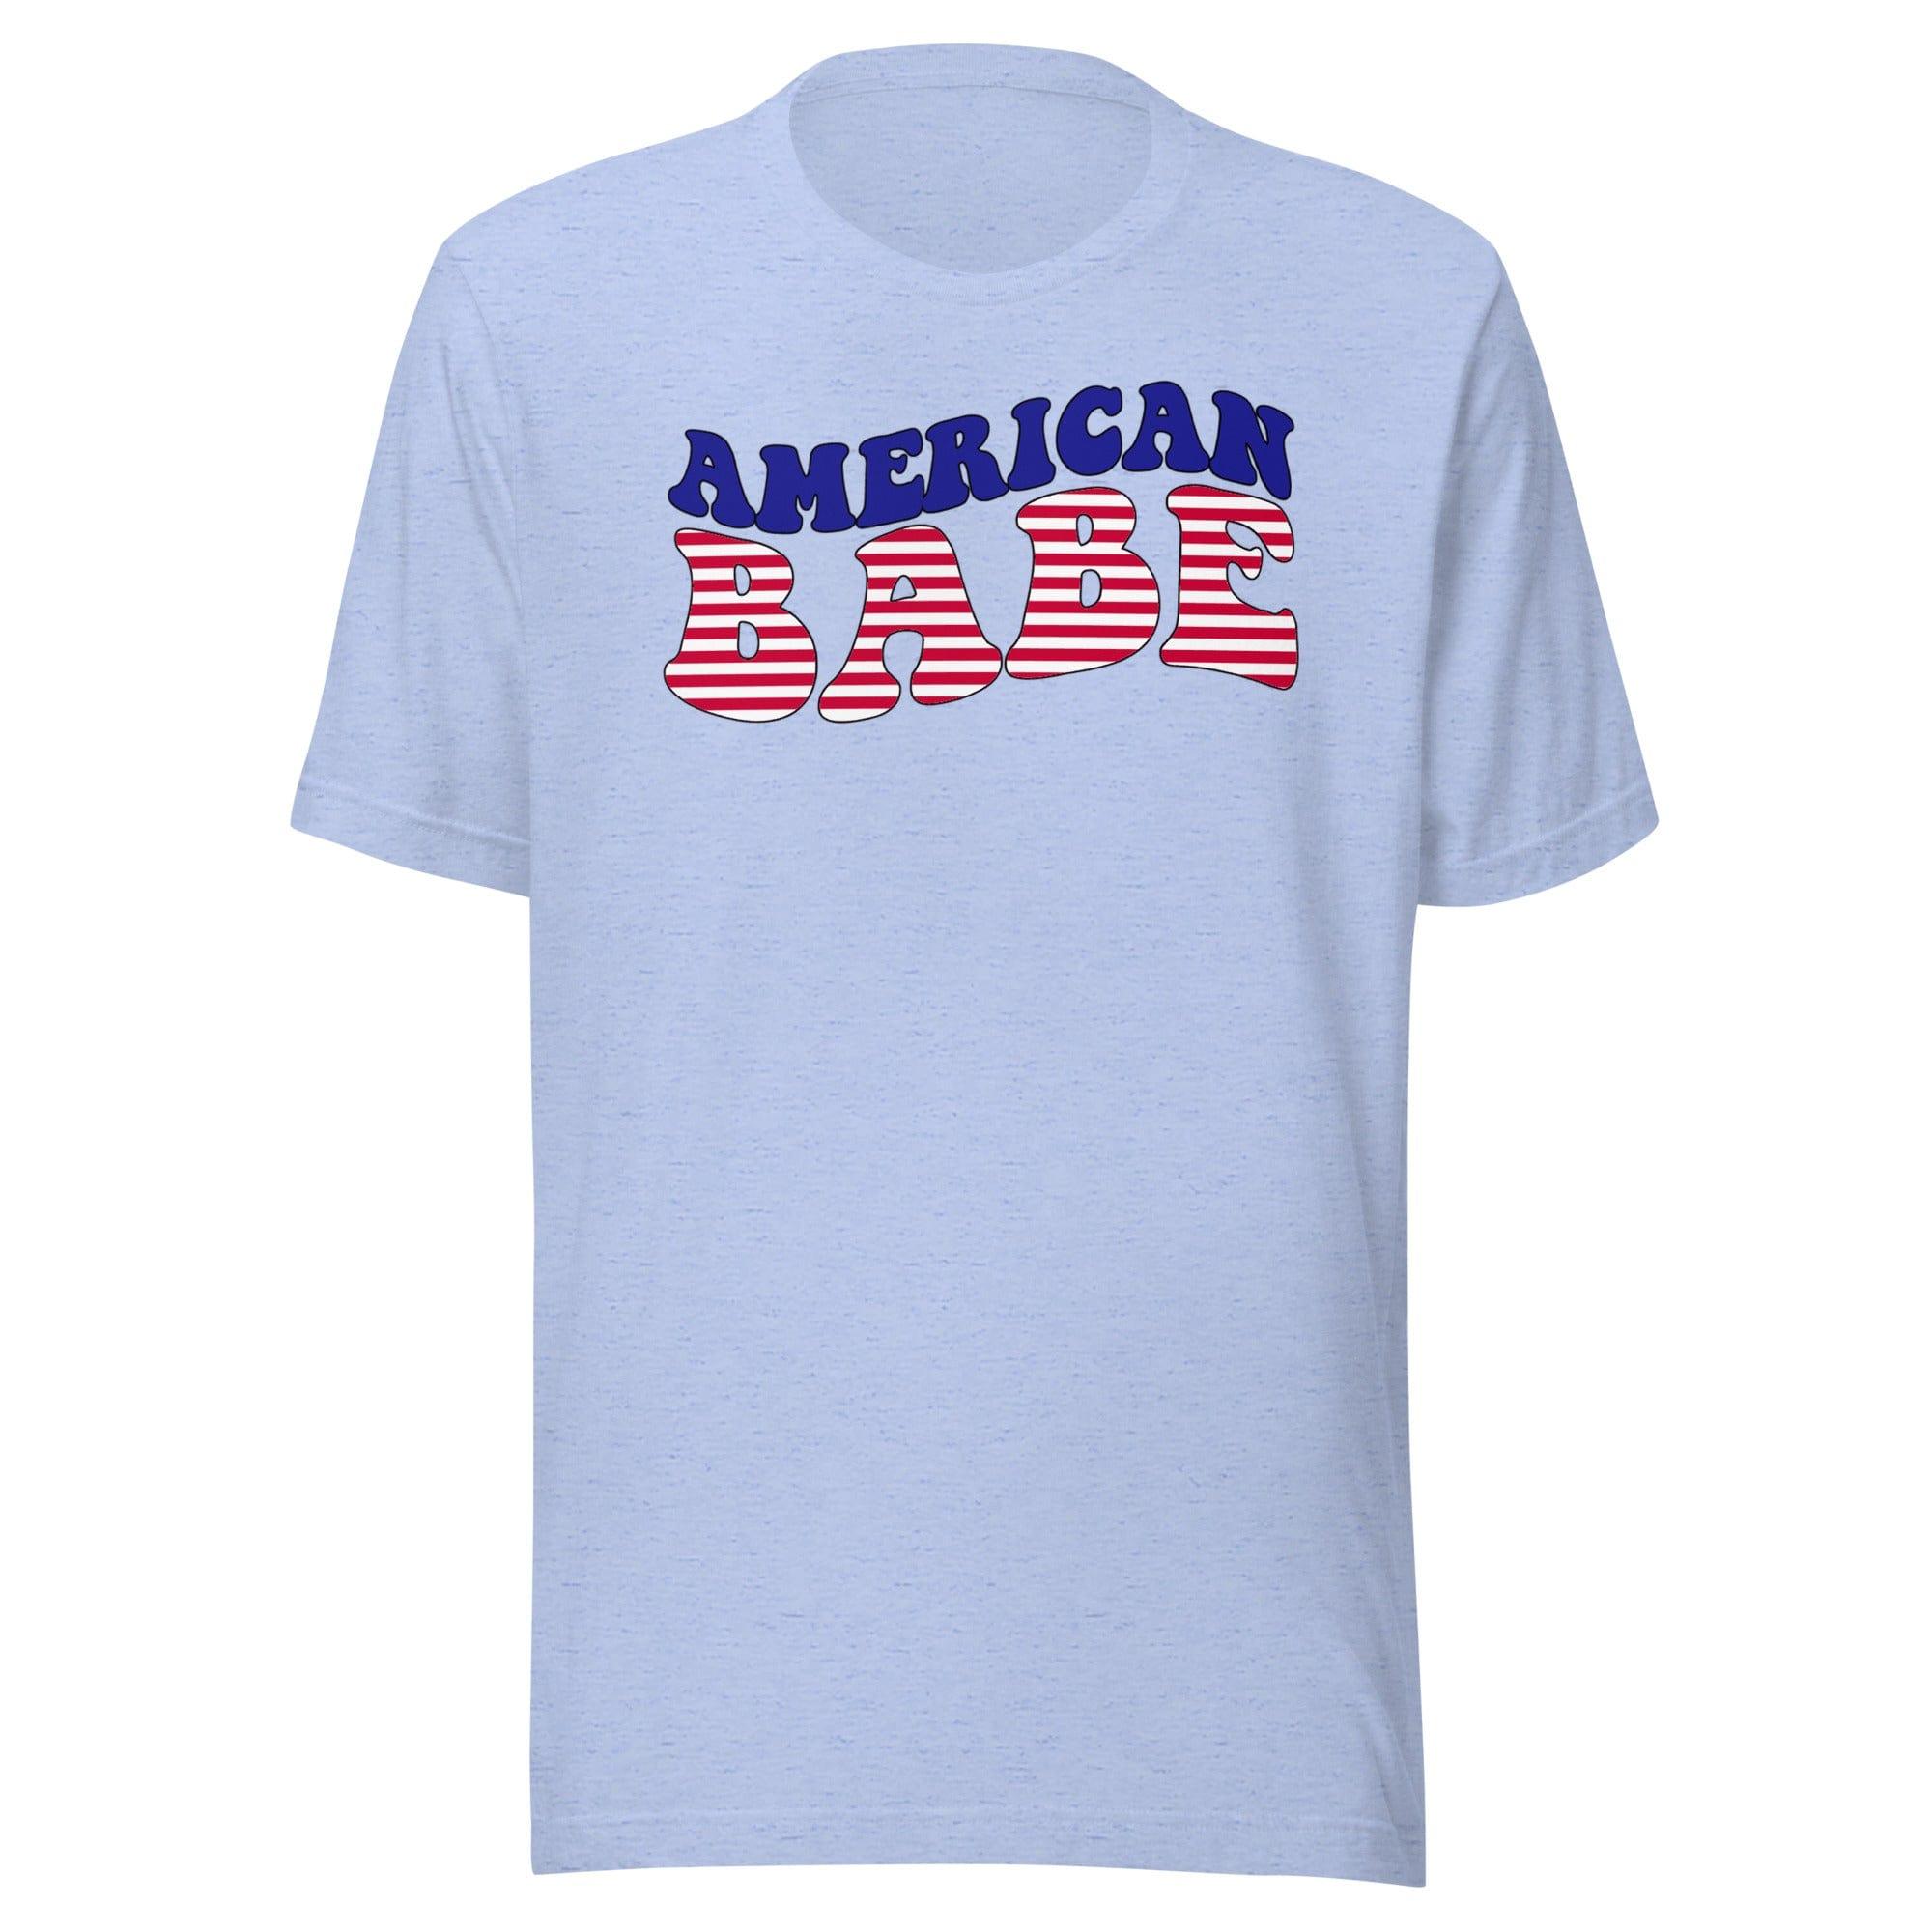 Patriotic T-shirt American Babe in Red White and Blue Short Sleeve Top - TopKoalaTee